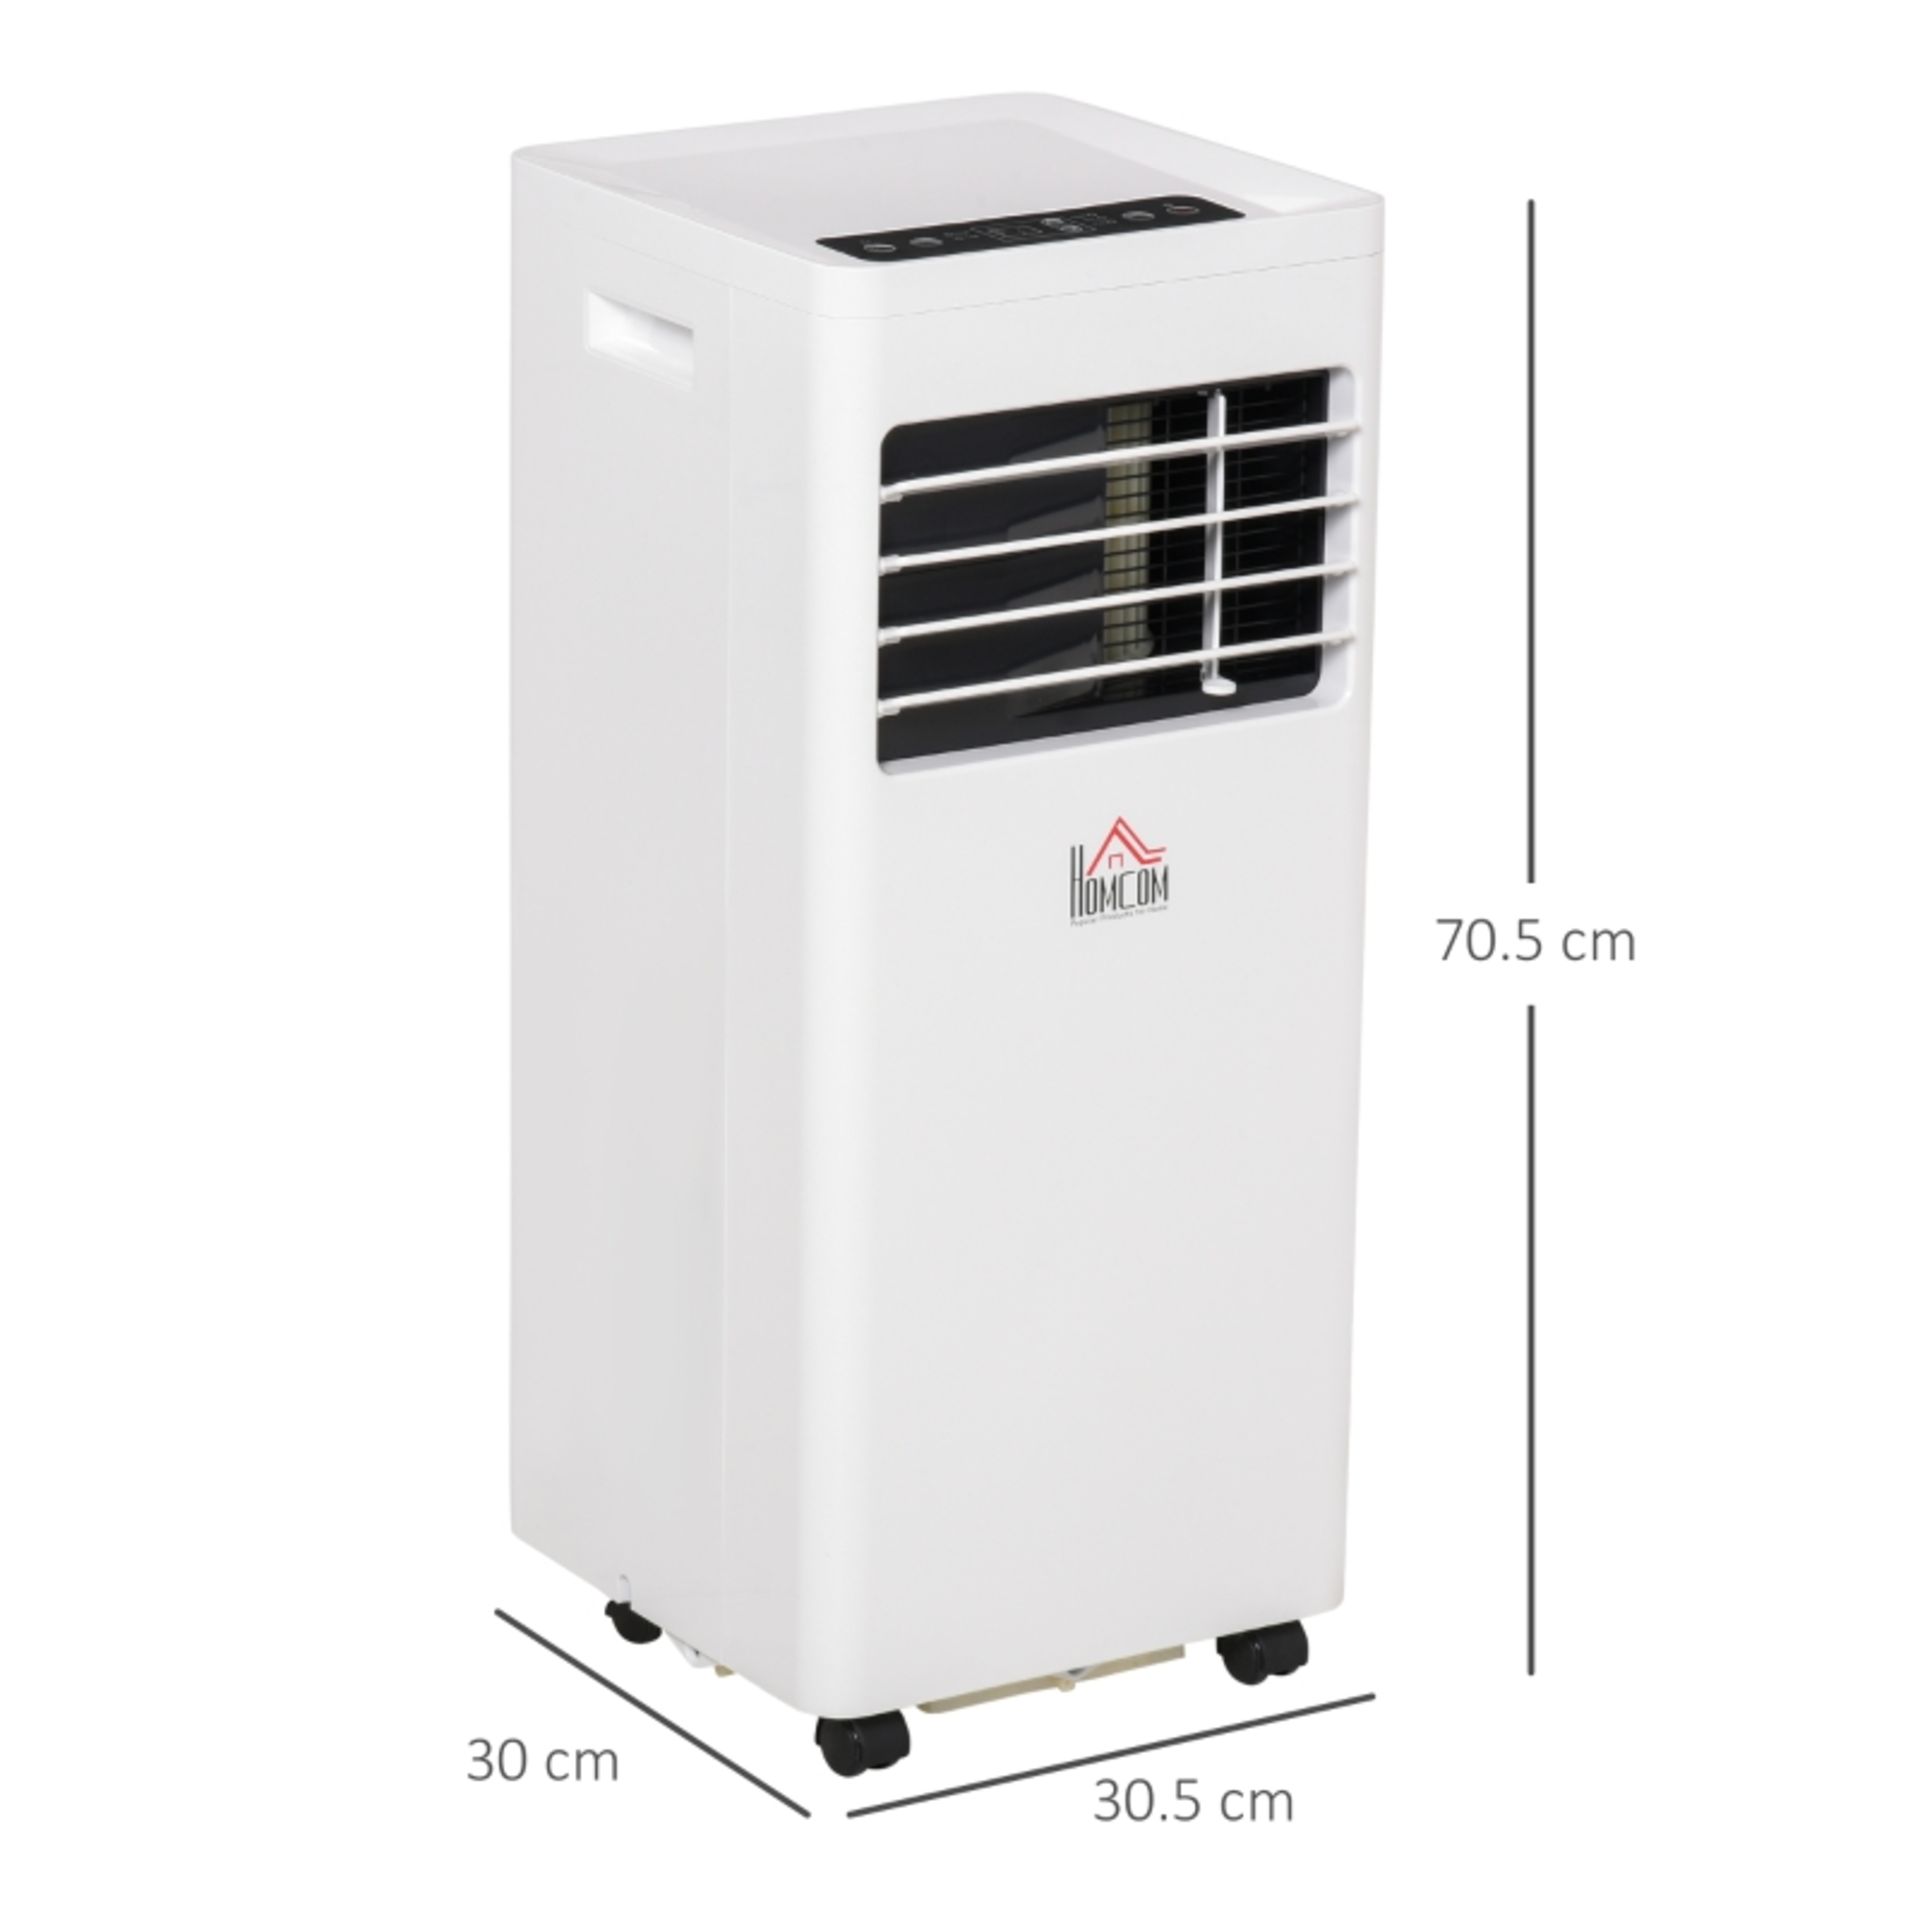 RPP £259.99 -HOMCOM Mobile Air Conditioner White W/ Remote Control Cooling Dehumidifying Ventilating - Image 3 of 4